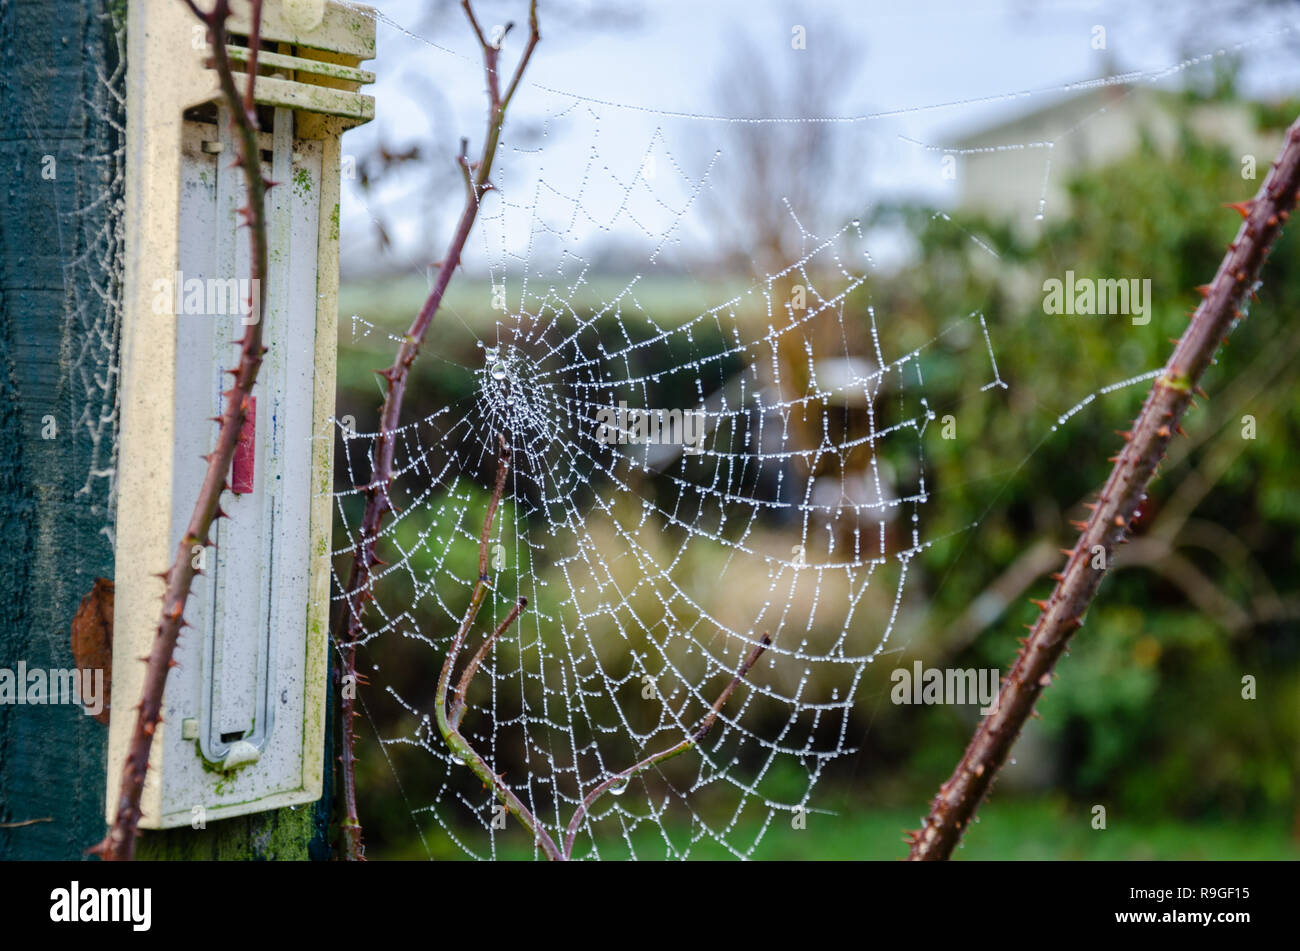 South Staffordshire, UK. 24th Dec, 2018. UK Weather: Early morning sun on what looks to be a warm Christmas Eve in south Staffordshire near Wolverhampton. Matthew Ashmore/Alamy Live News Stock Photo